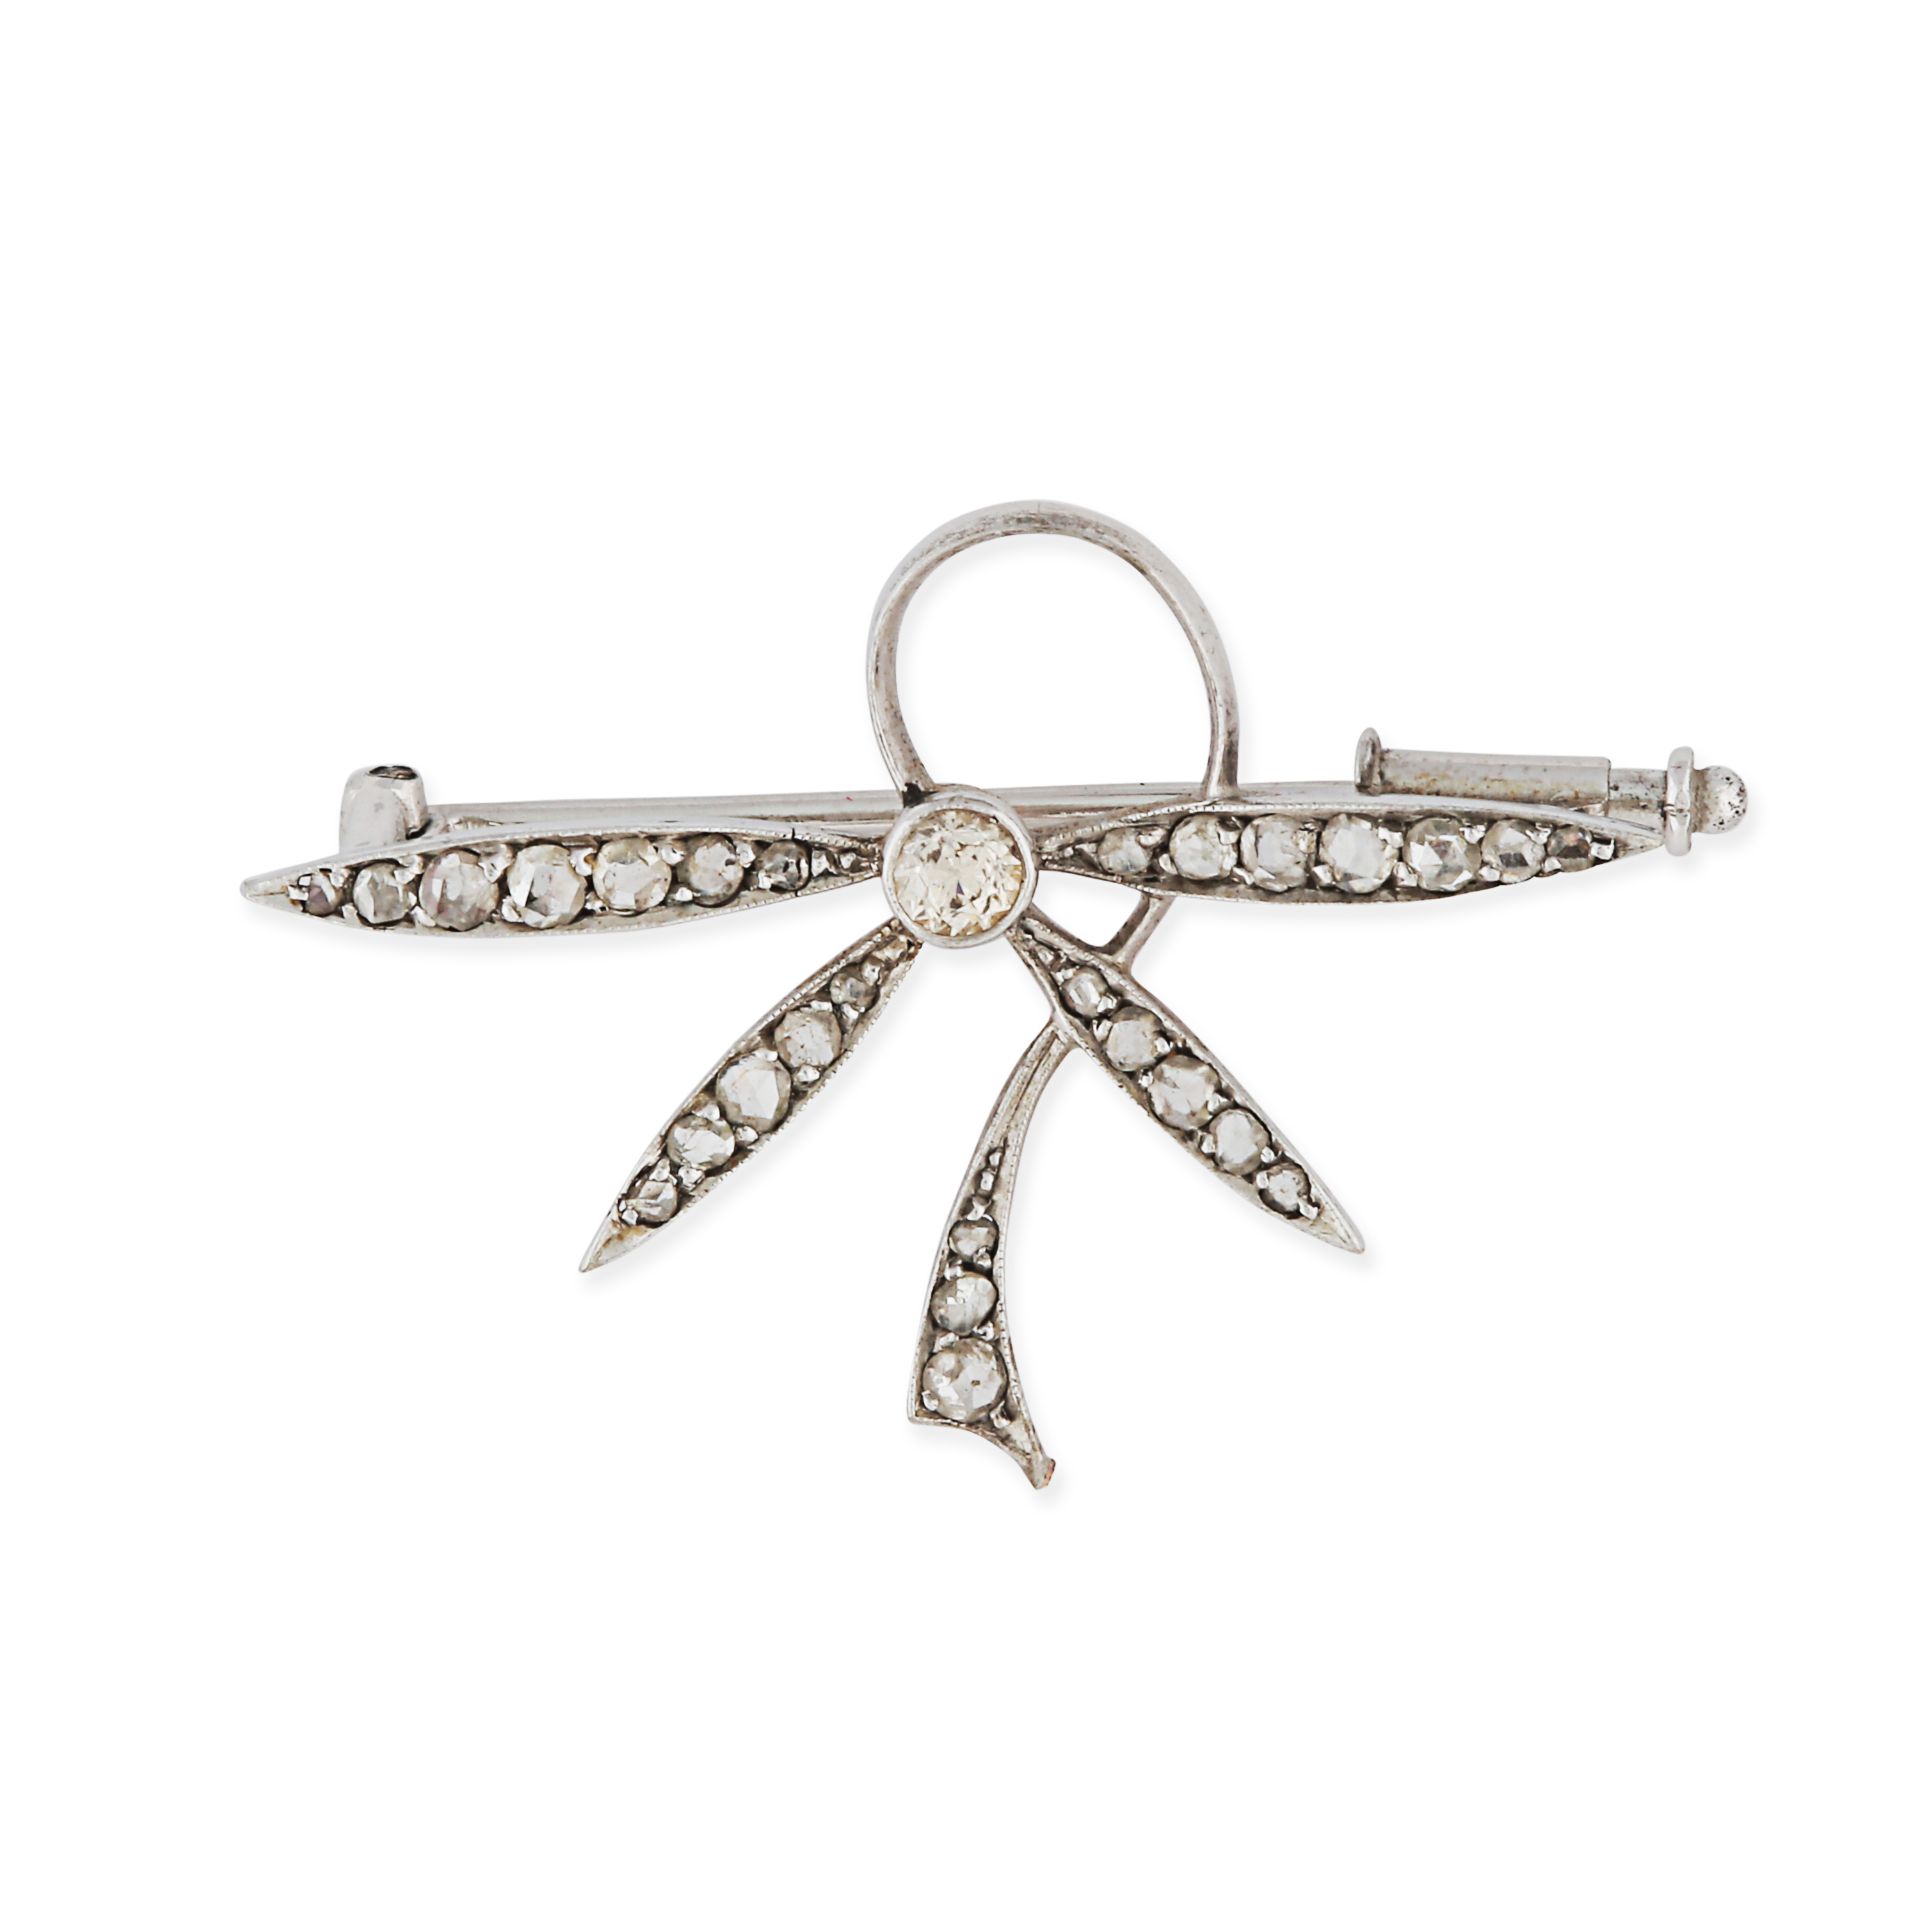 A DIAMOND BROOCH in 18ct white gold, designed as a stylised bow set with old cut and rose cut dia...